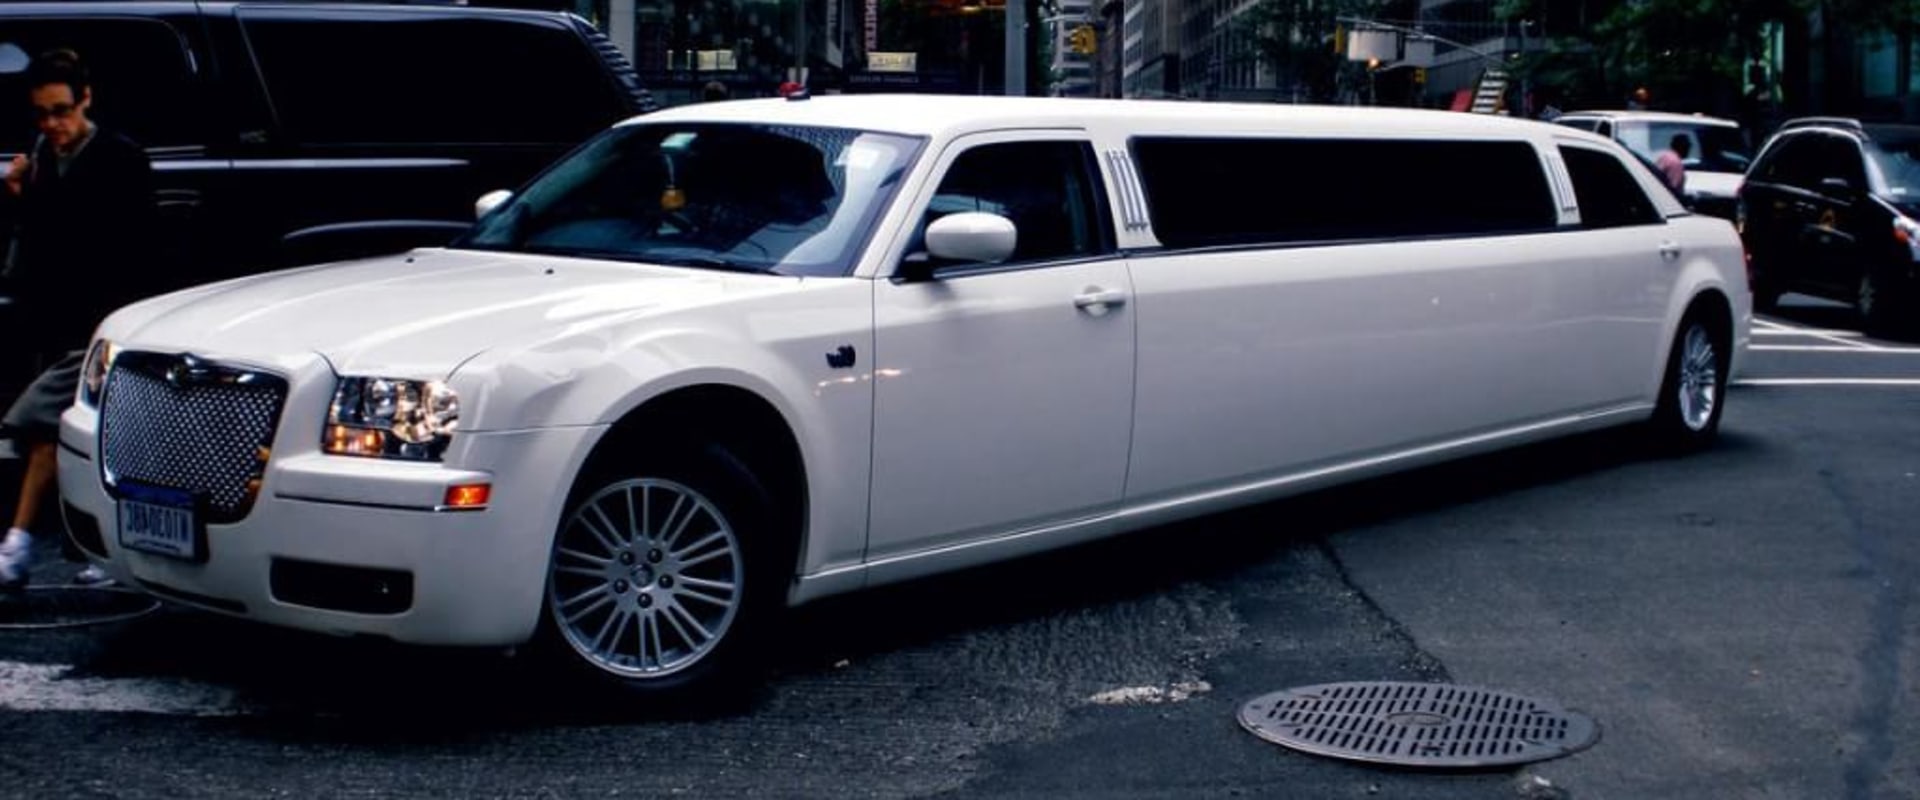 How much is limo for day in nyc?